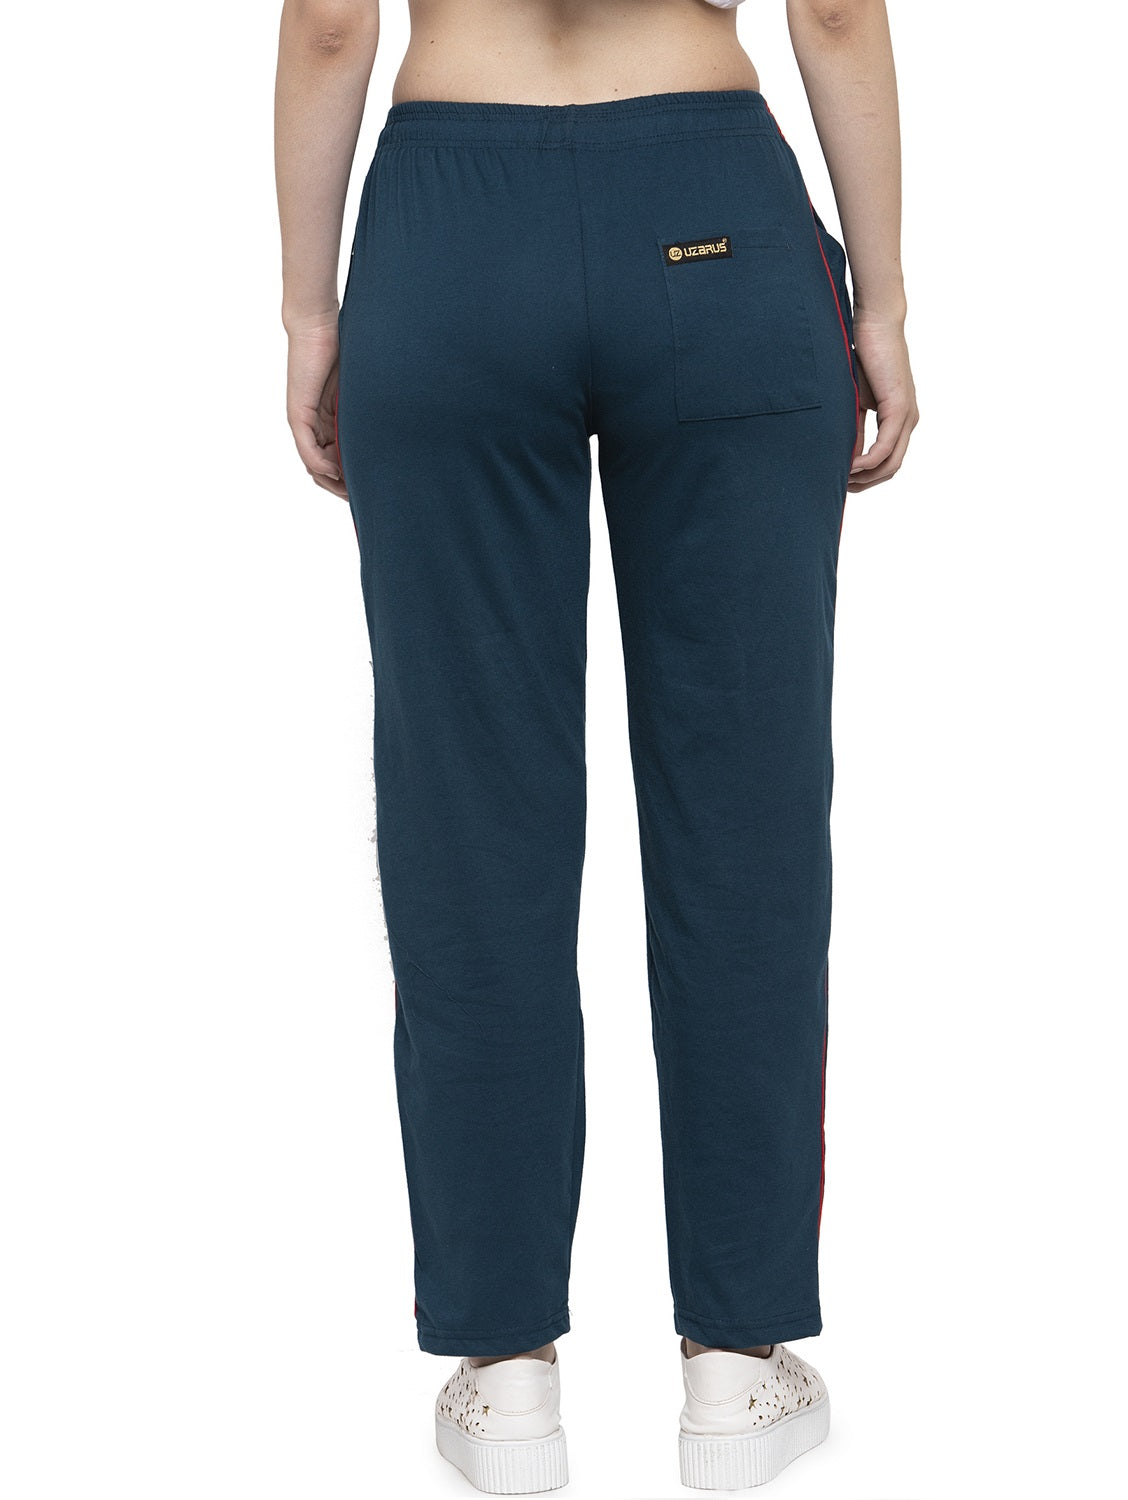 Uzarus Women's Cotton Track Pants With 2 Zippered Pockets